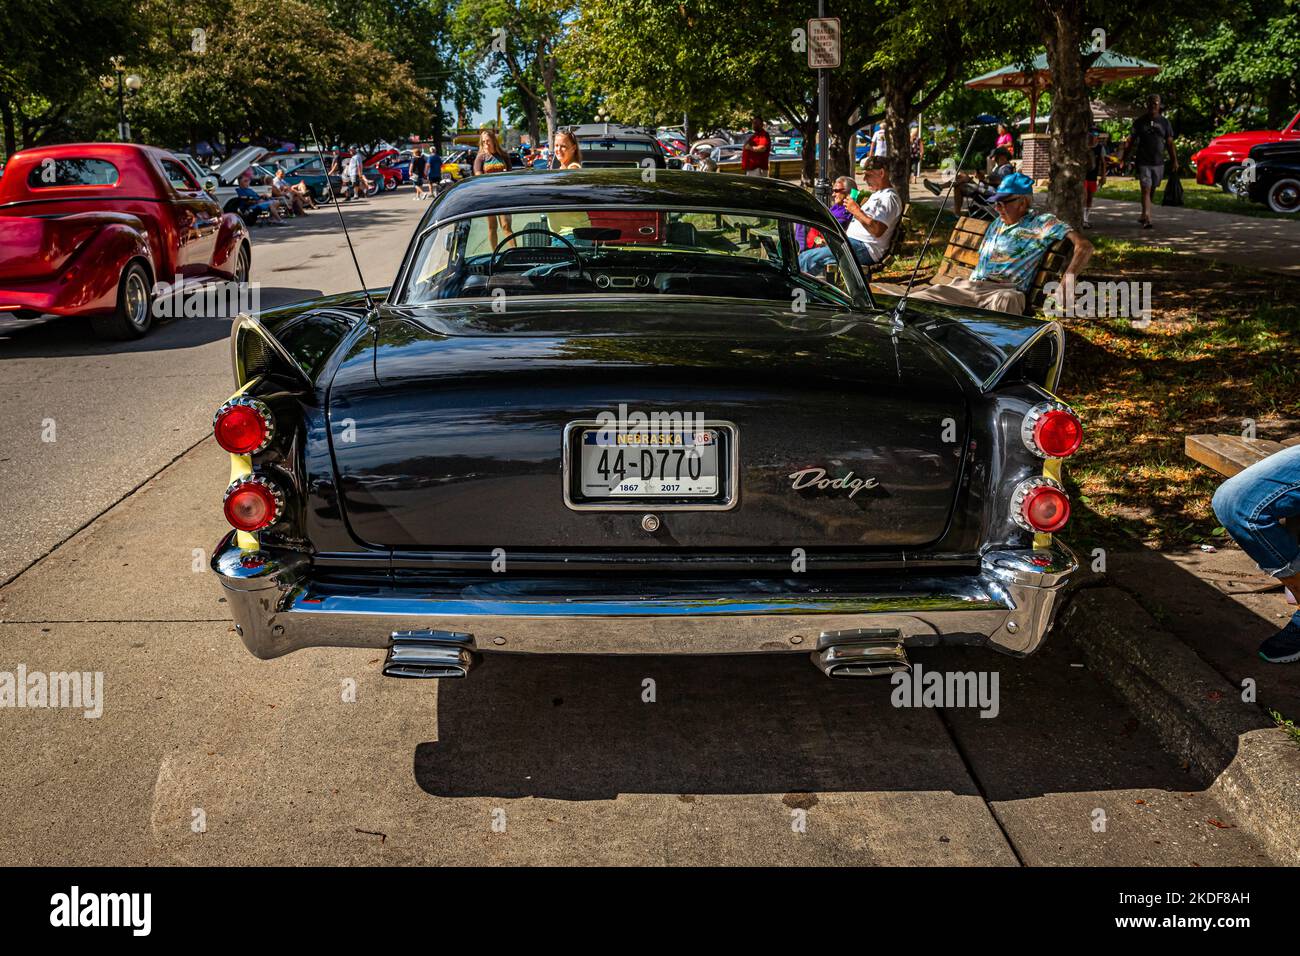 Des Moines, IA - July 01, 2022: High perspective rear view of a 1958 Dodge Royal Lancer 2 Door Hardtop at a local car show. Stock Photo